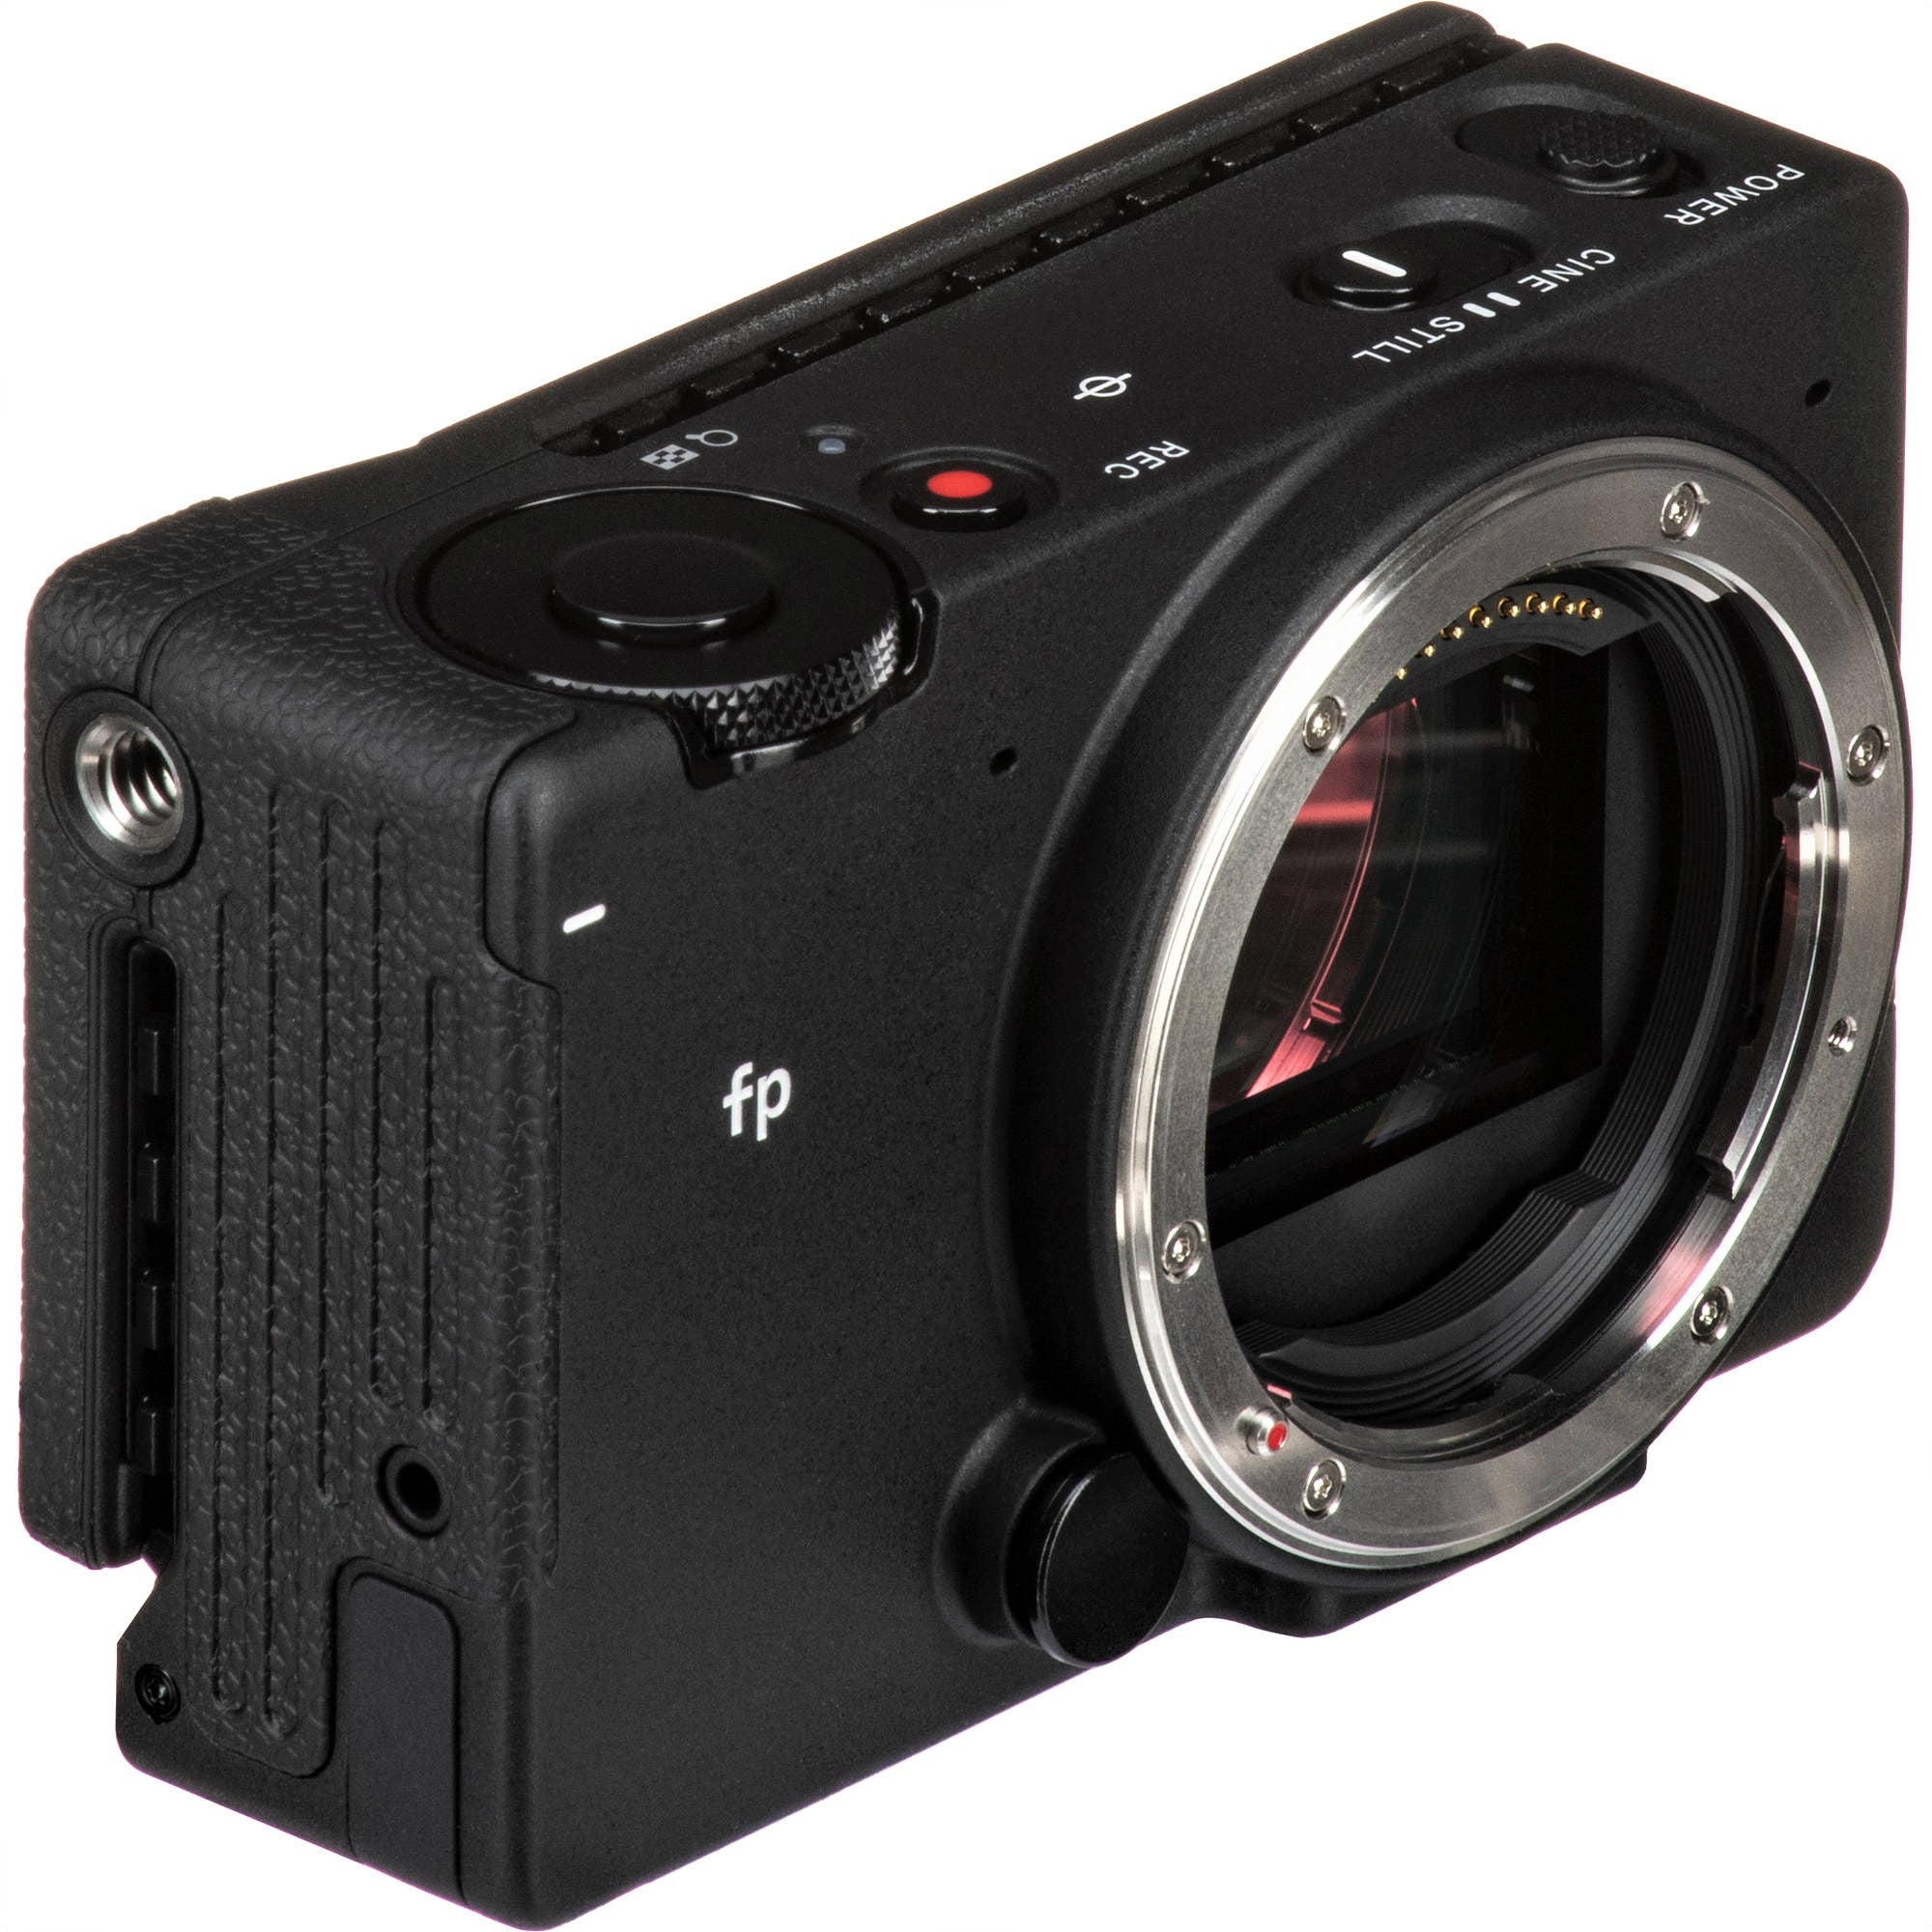 Sigma fp Mirrorless Camera in a Side View